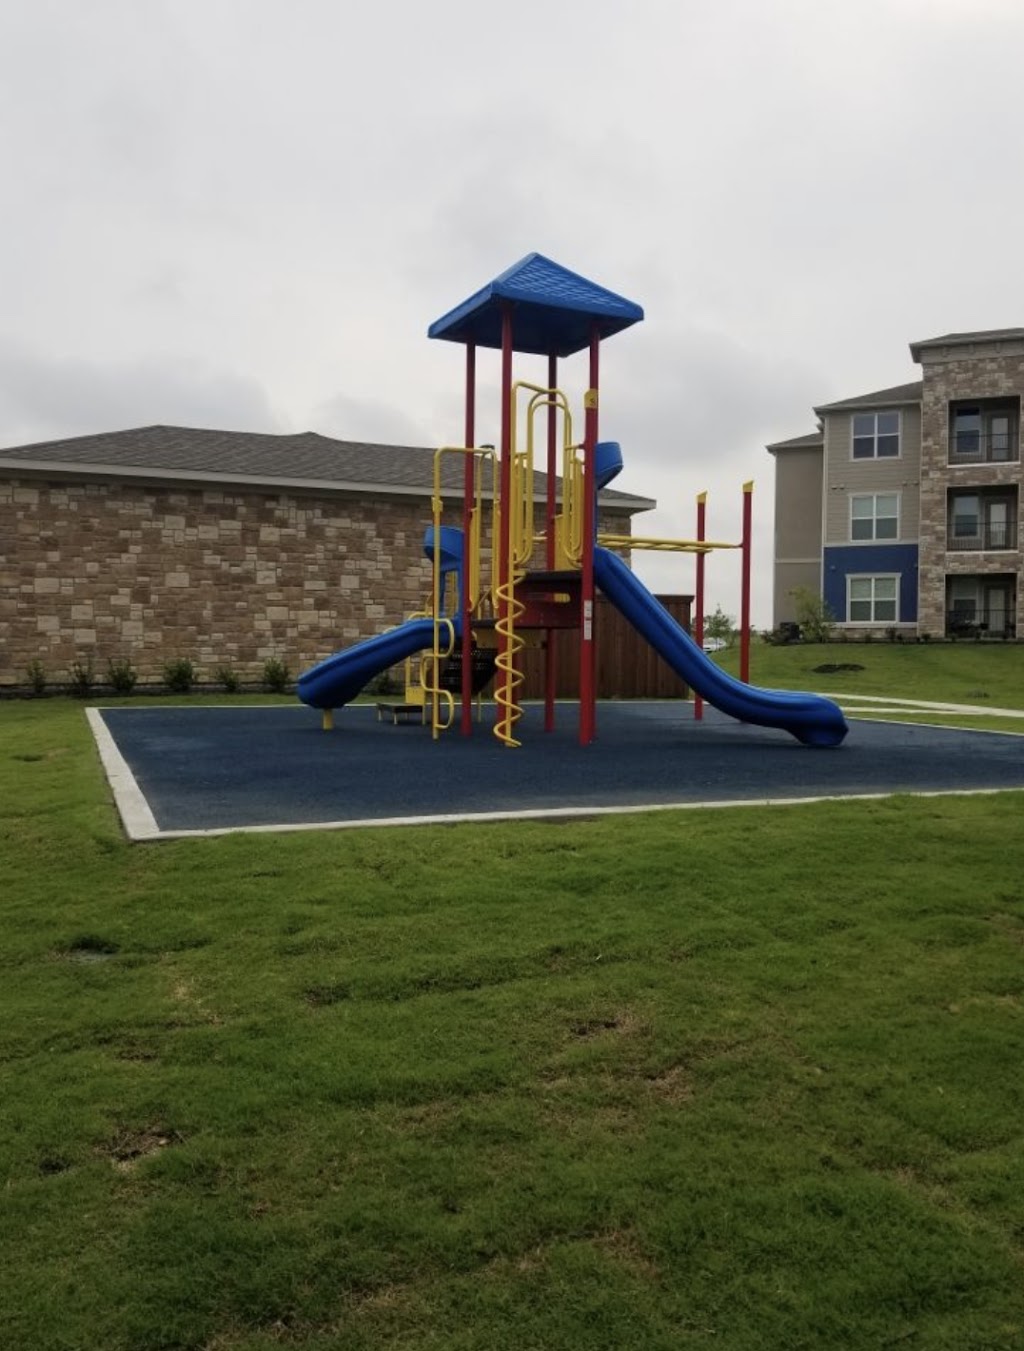 Cross Timbers Apartments | 1905 Centerpoint Ln, Greenville, TX 75402, USA | Phone: (430) 558-6527